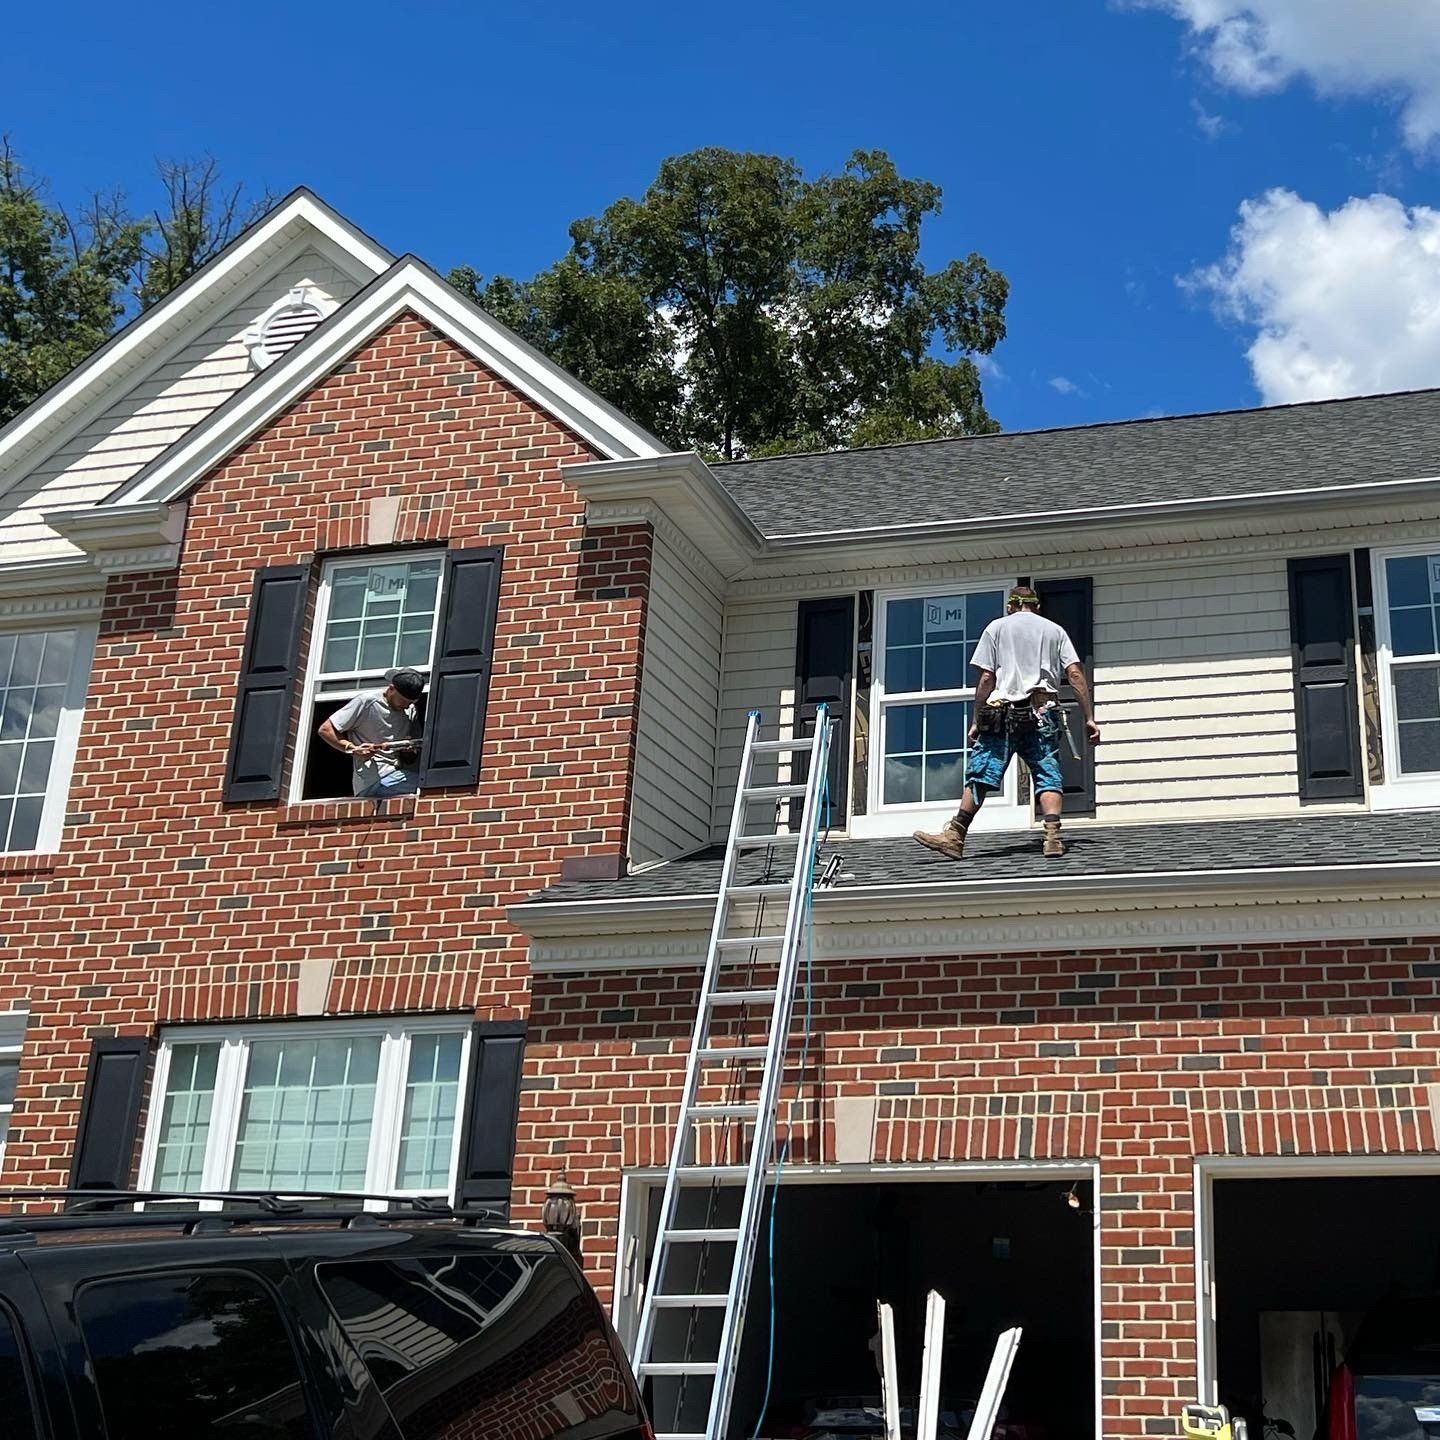 Windows Installation Services in Westampton, NJ and Surrounding Areas